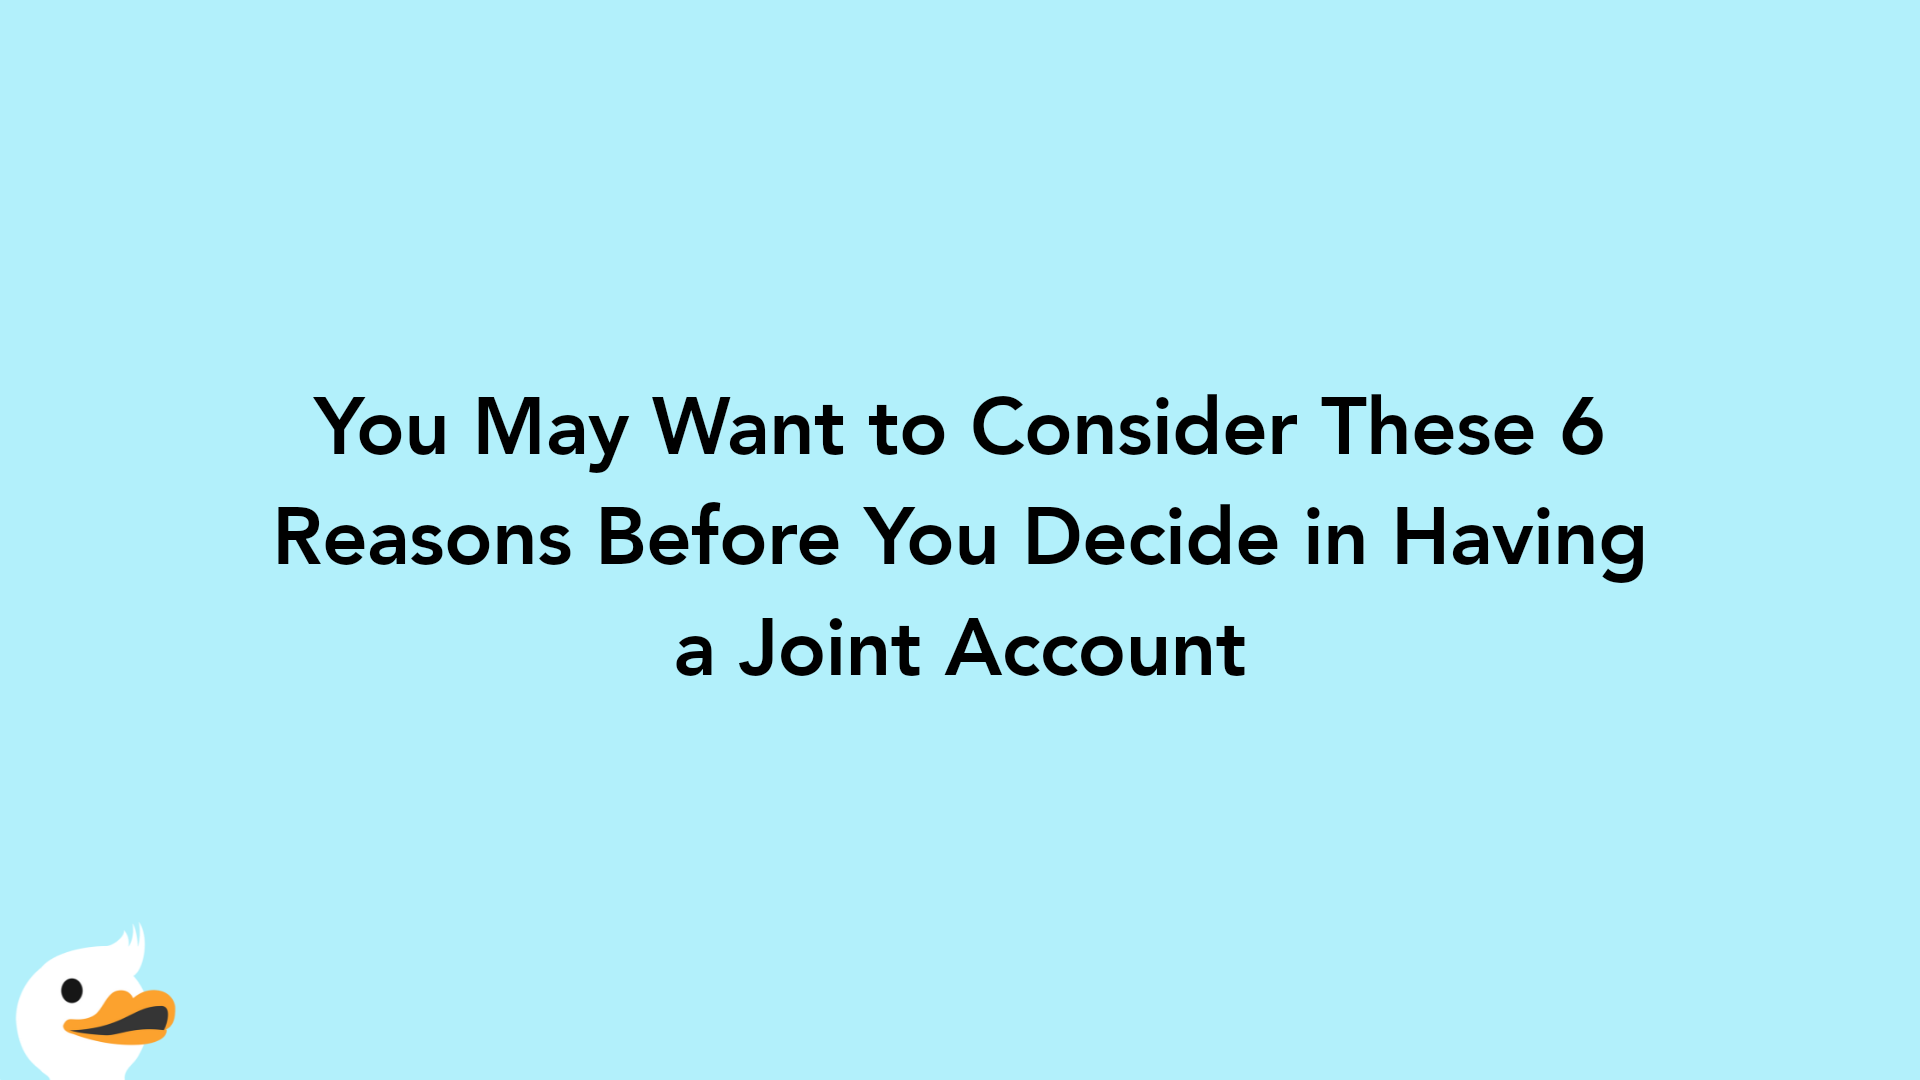 You May Want to Consider These 6 Reasons Before You Decide in Having a Joint Account